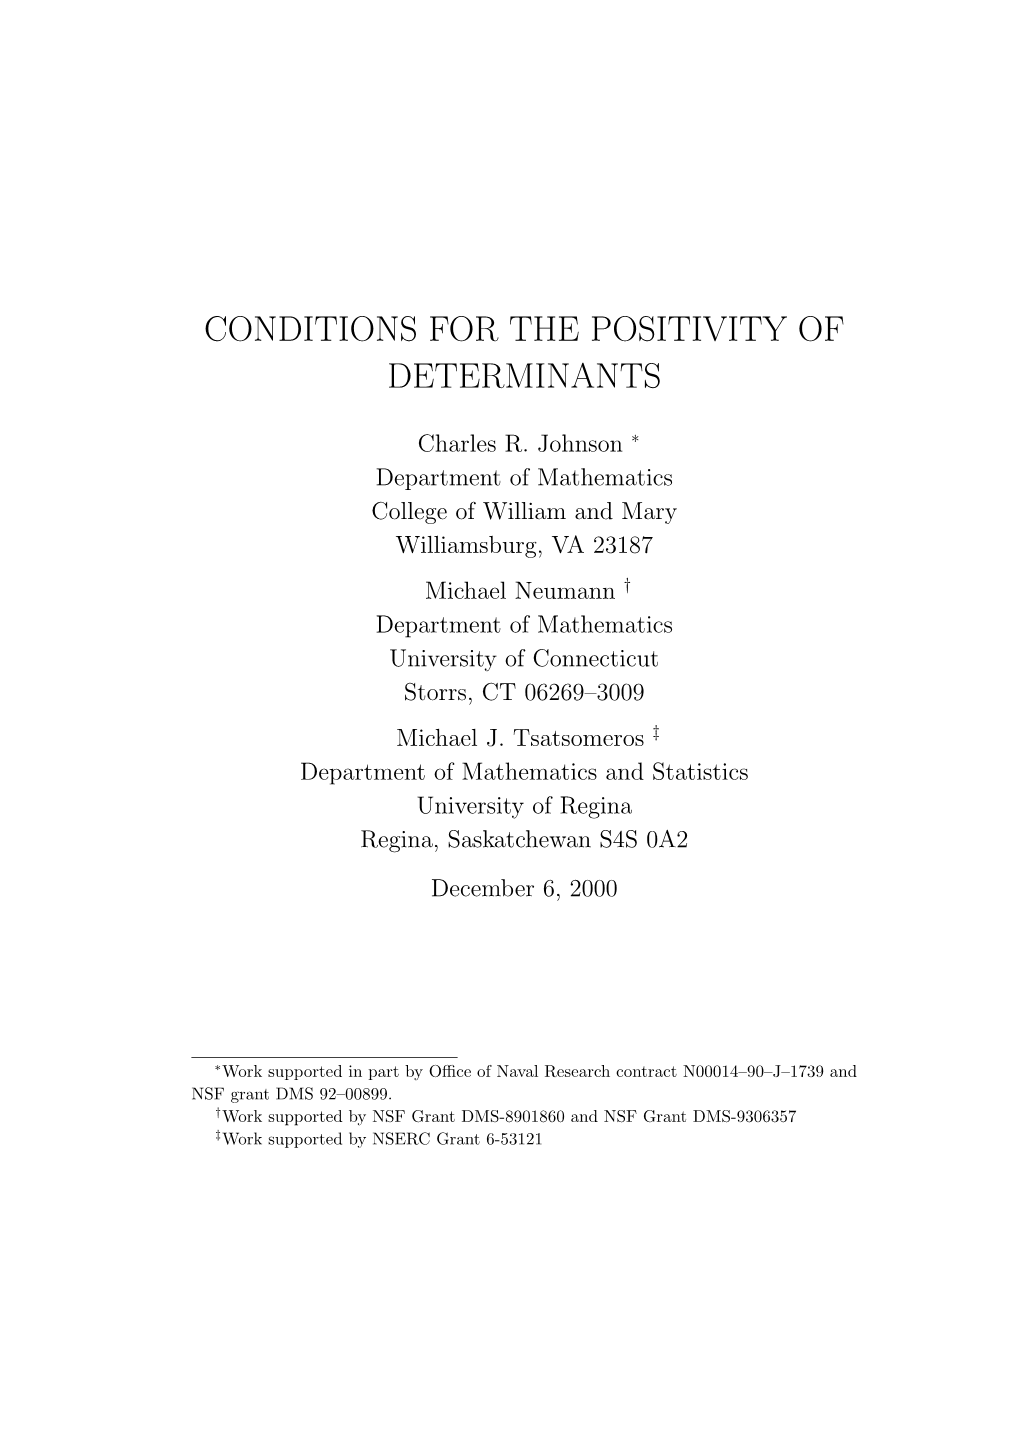 Conditions for the Positivity of Determinants